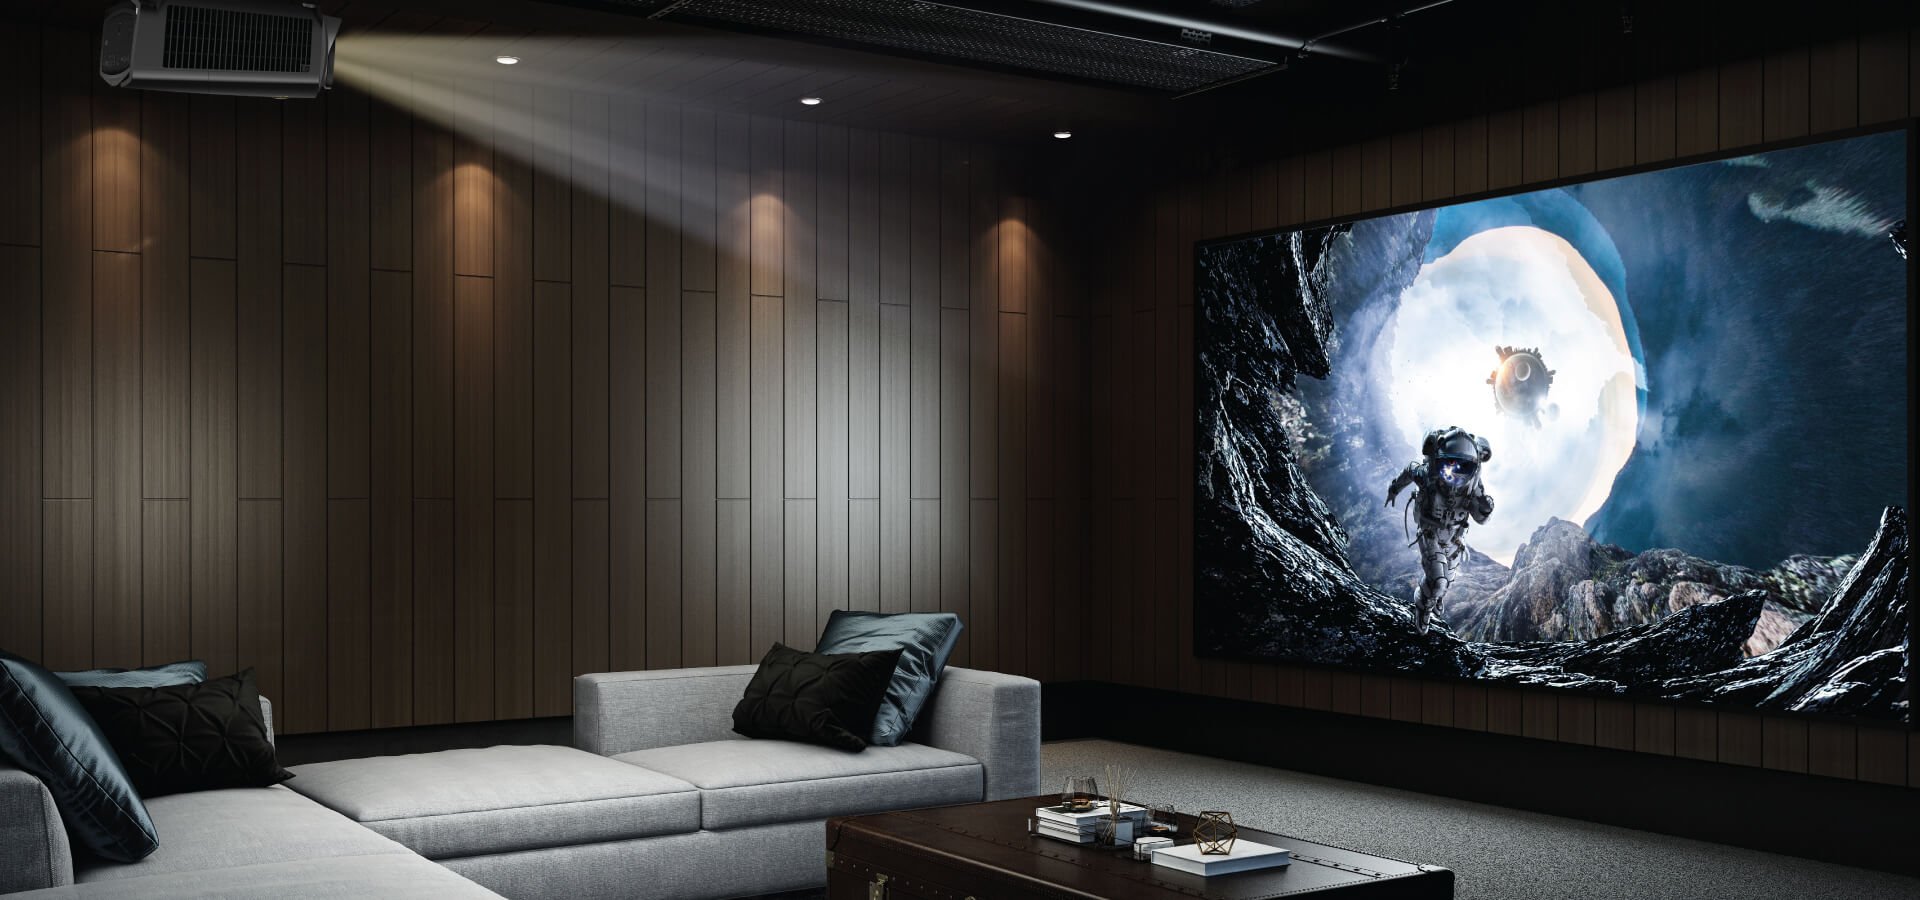 BenQ Dolby Atmos Krix IW-50 512 Projection System